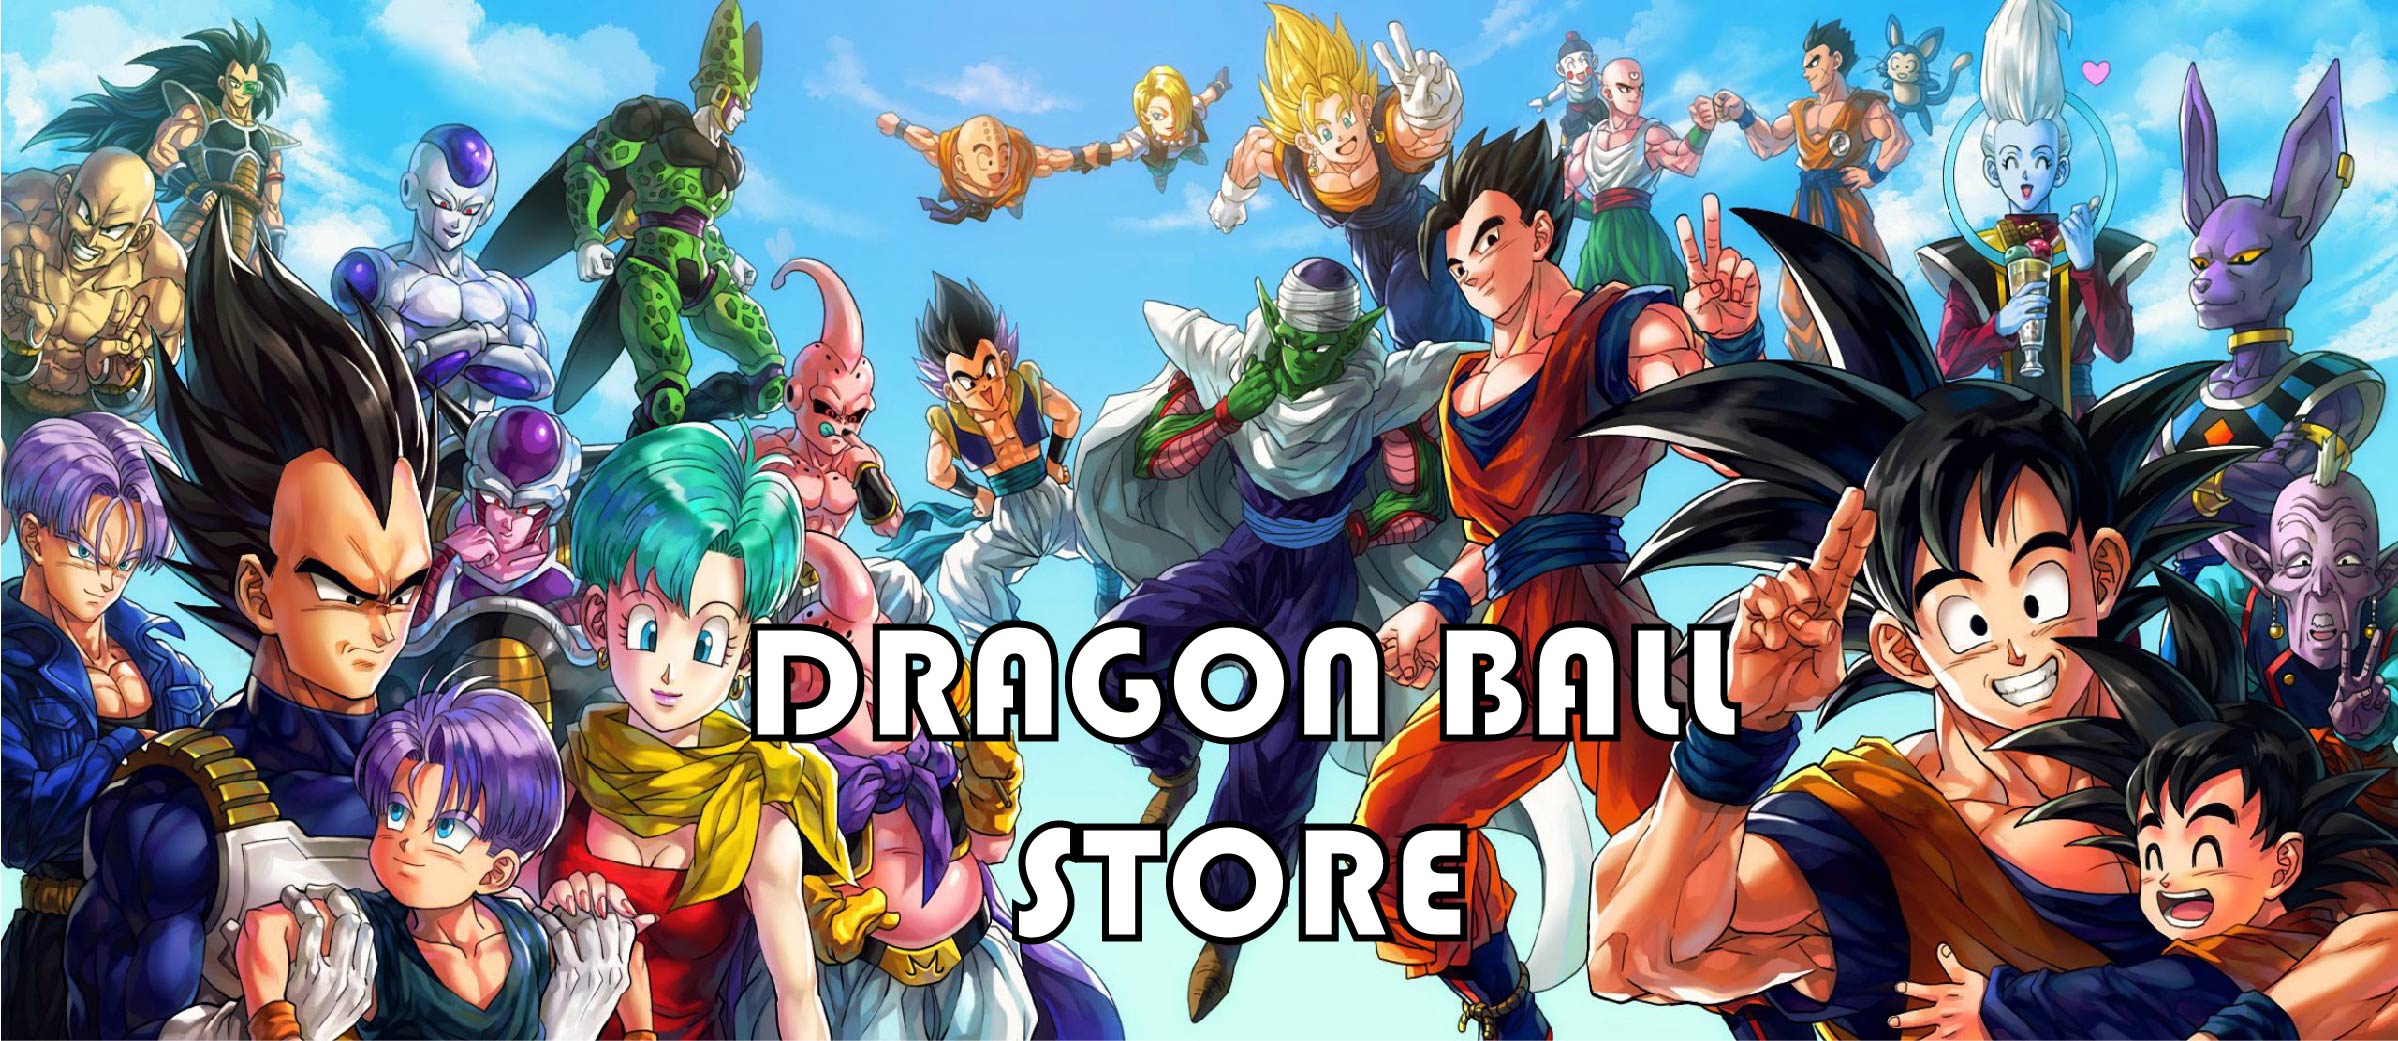 DragonBallStore-about us